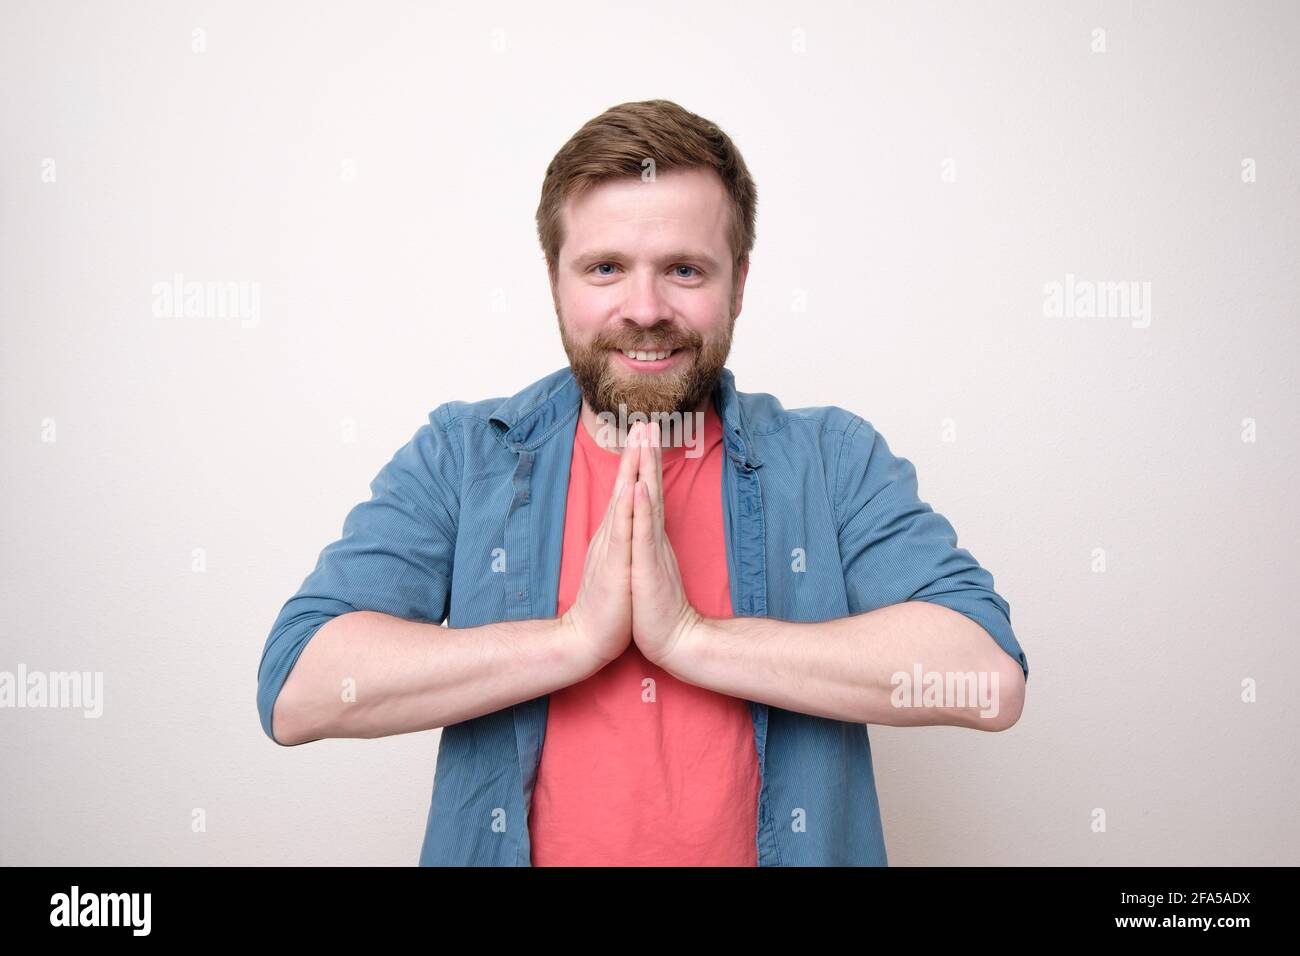 Welcoming, friendly Caucasian man folded his palms together and smiling cutely while looking into the camera. White background. Stock Photo